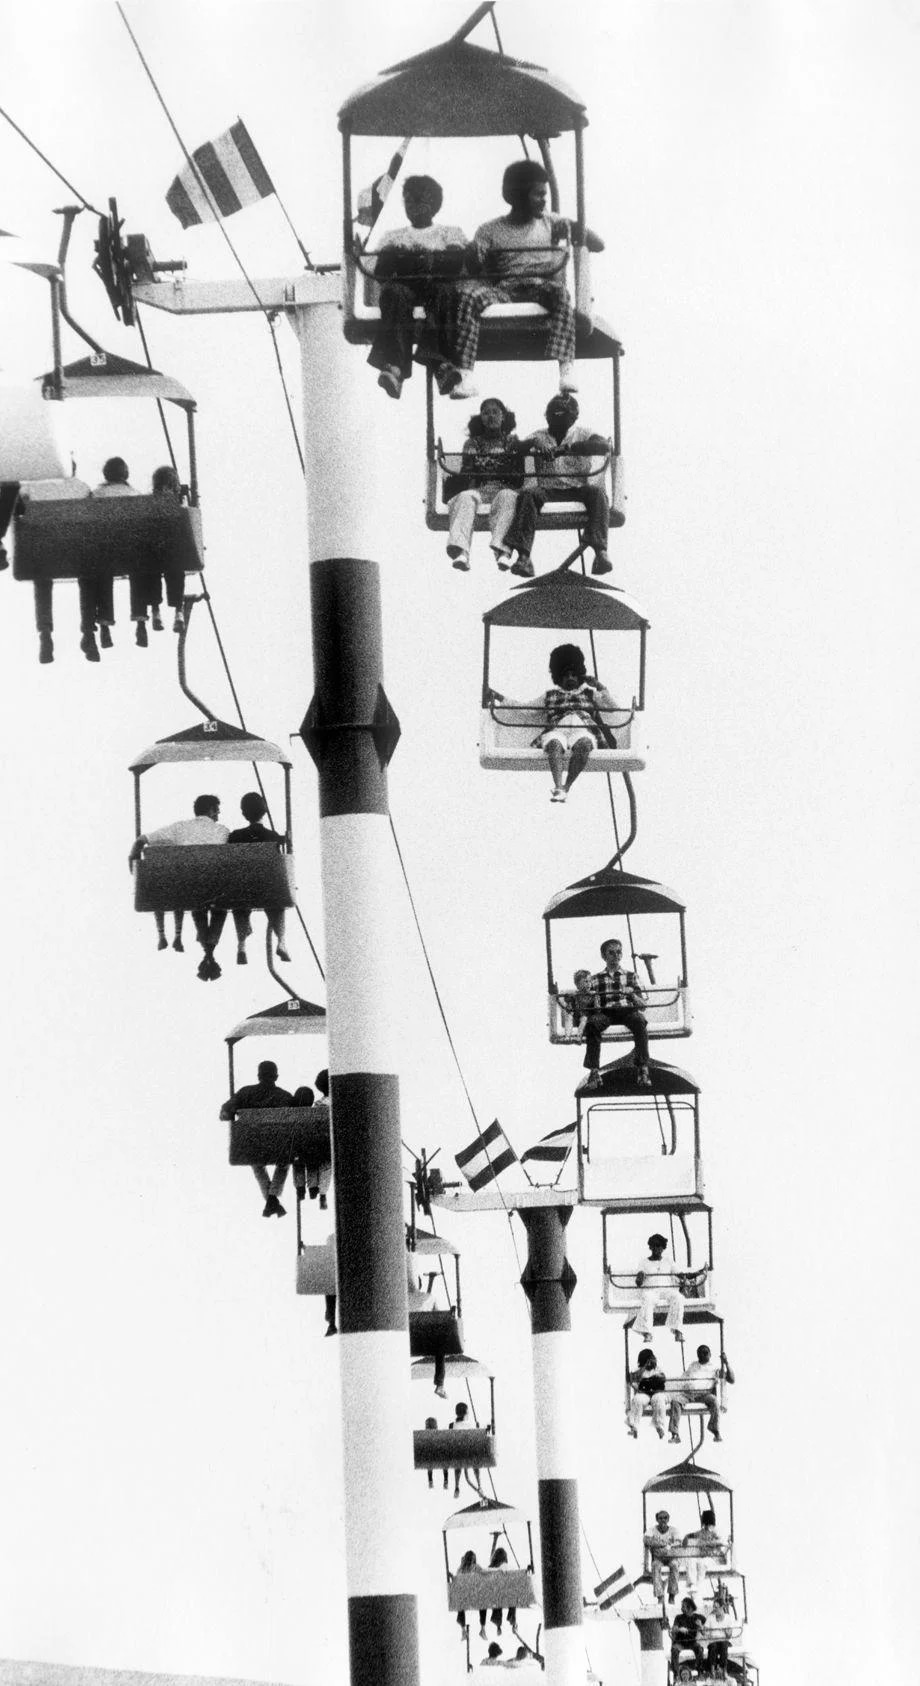 Patrons at the Virginia State Fair took in the view from the sky glider ride on the midway, 1974.